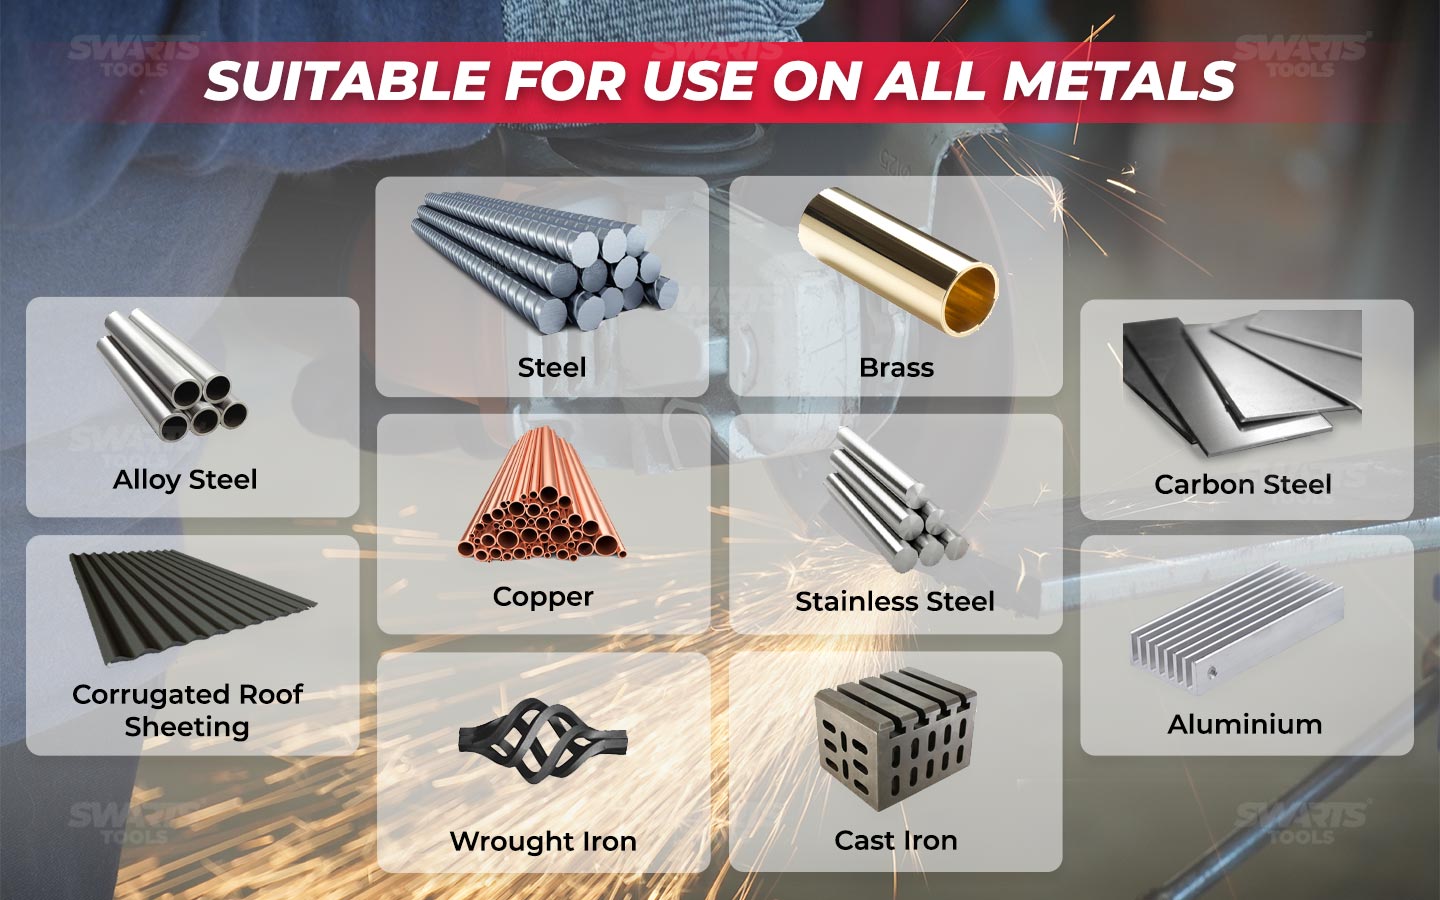 Suitable for us on all metals: Steel, alloy steel, stainless steel, carbon steel, copper, brass, carbon aluminium, cast iron, wrought iron, corrugated roof sheeting